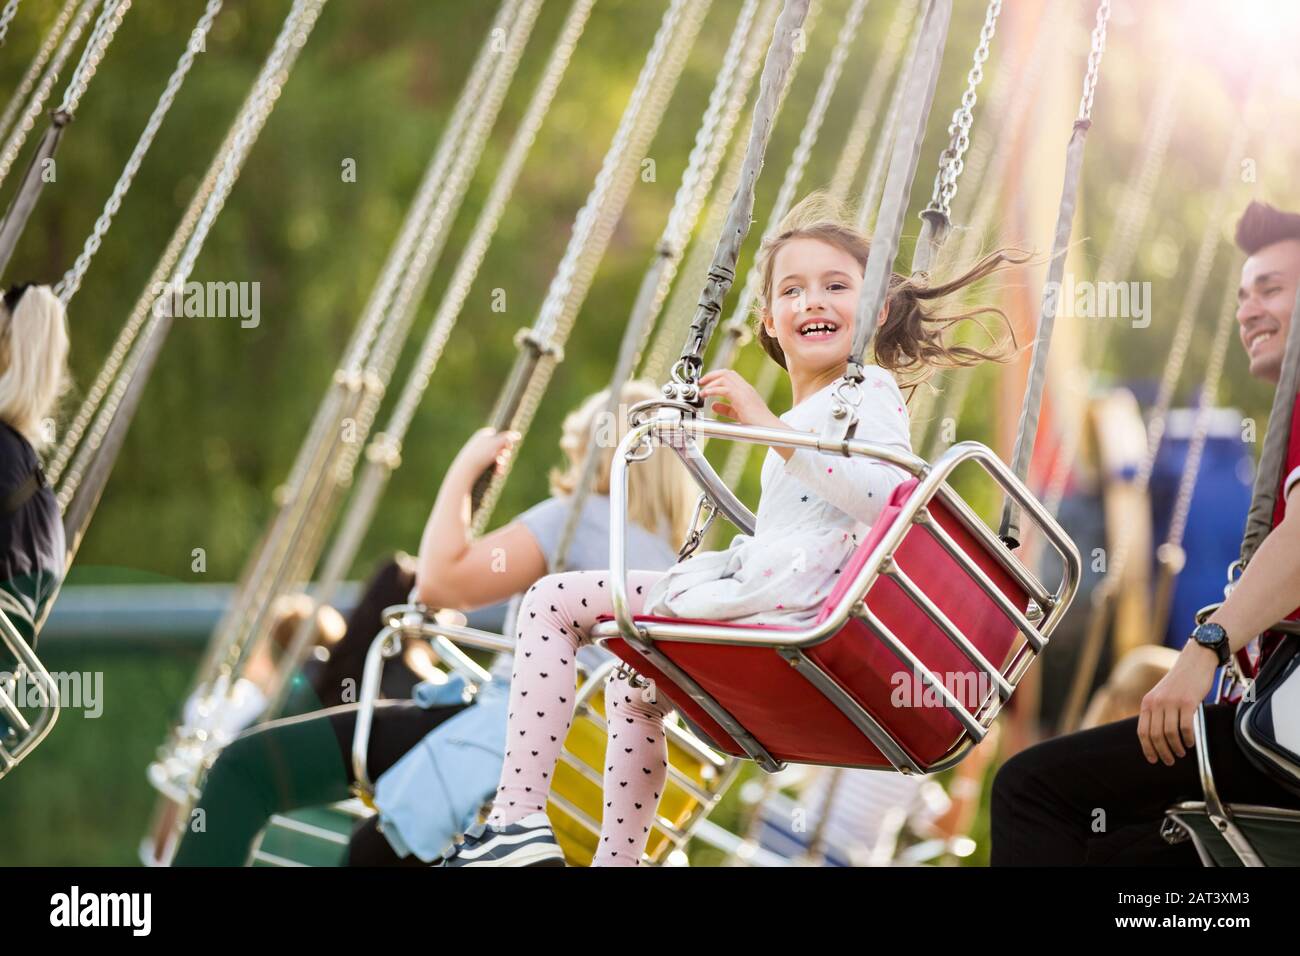 Little girl having fun on chain carousel. Happy summer memories. Carefree childhood and happiness Stock Photo